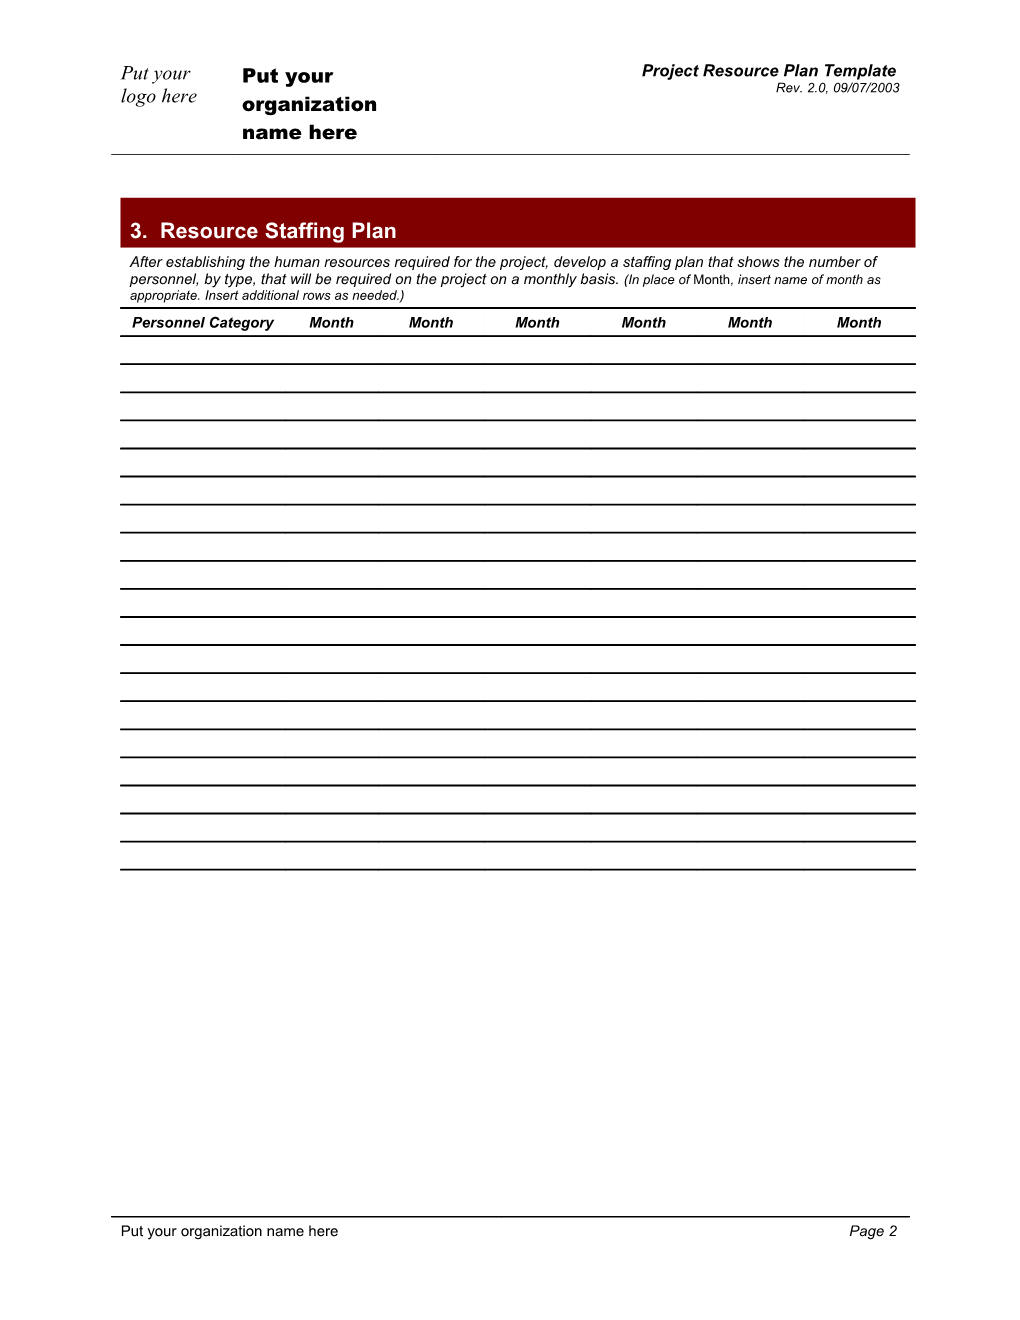 Project Resource Plan Template